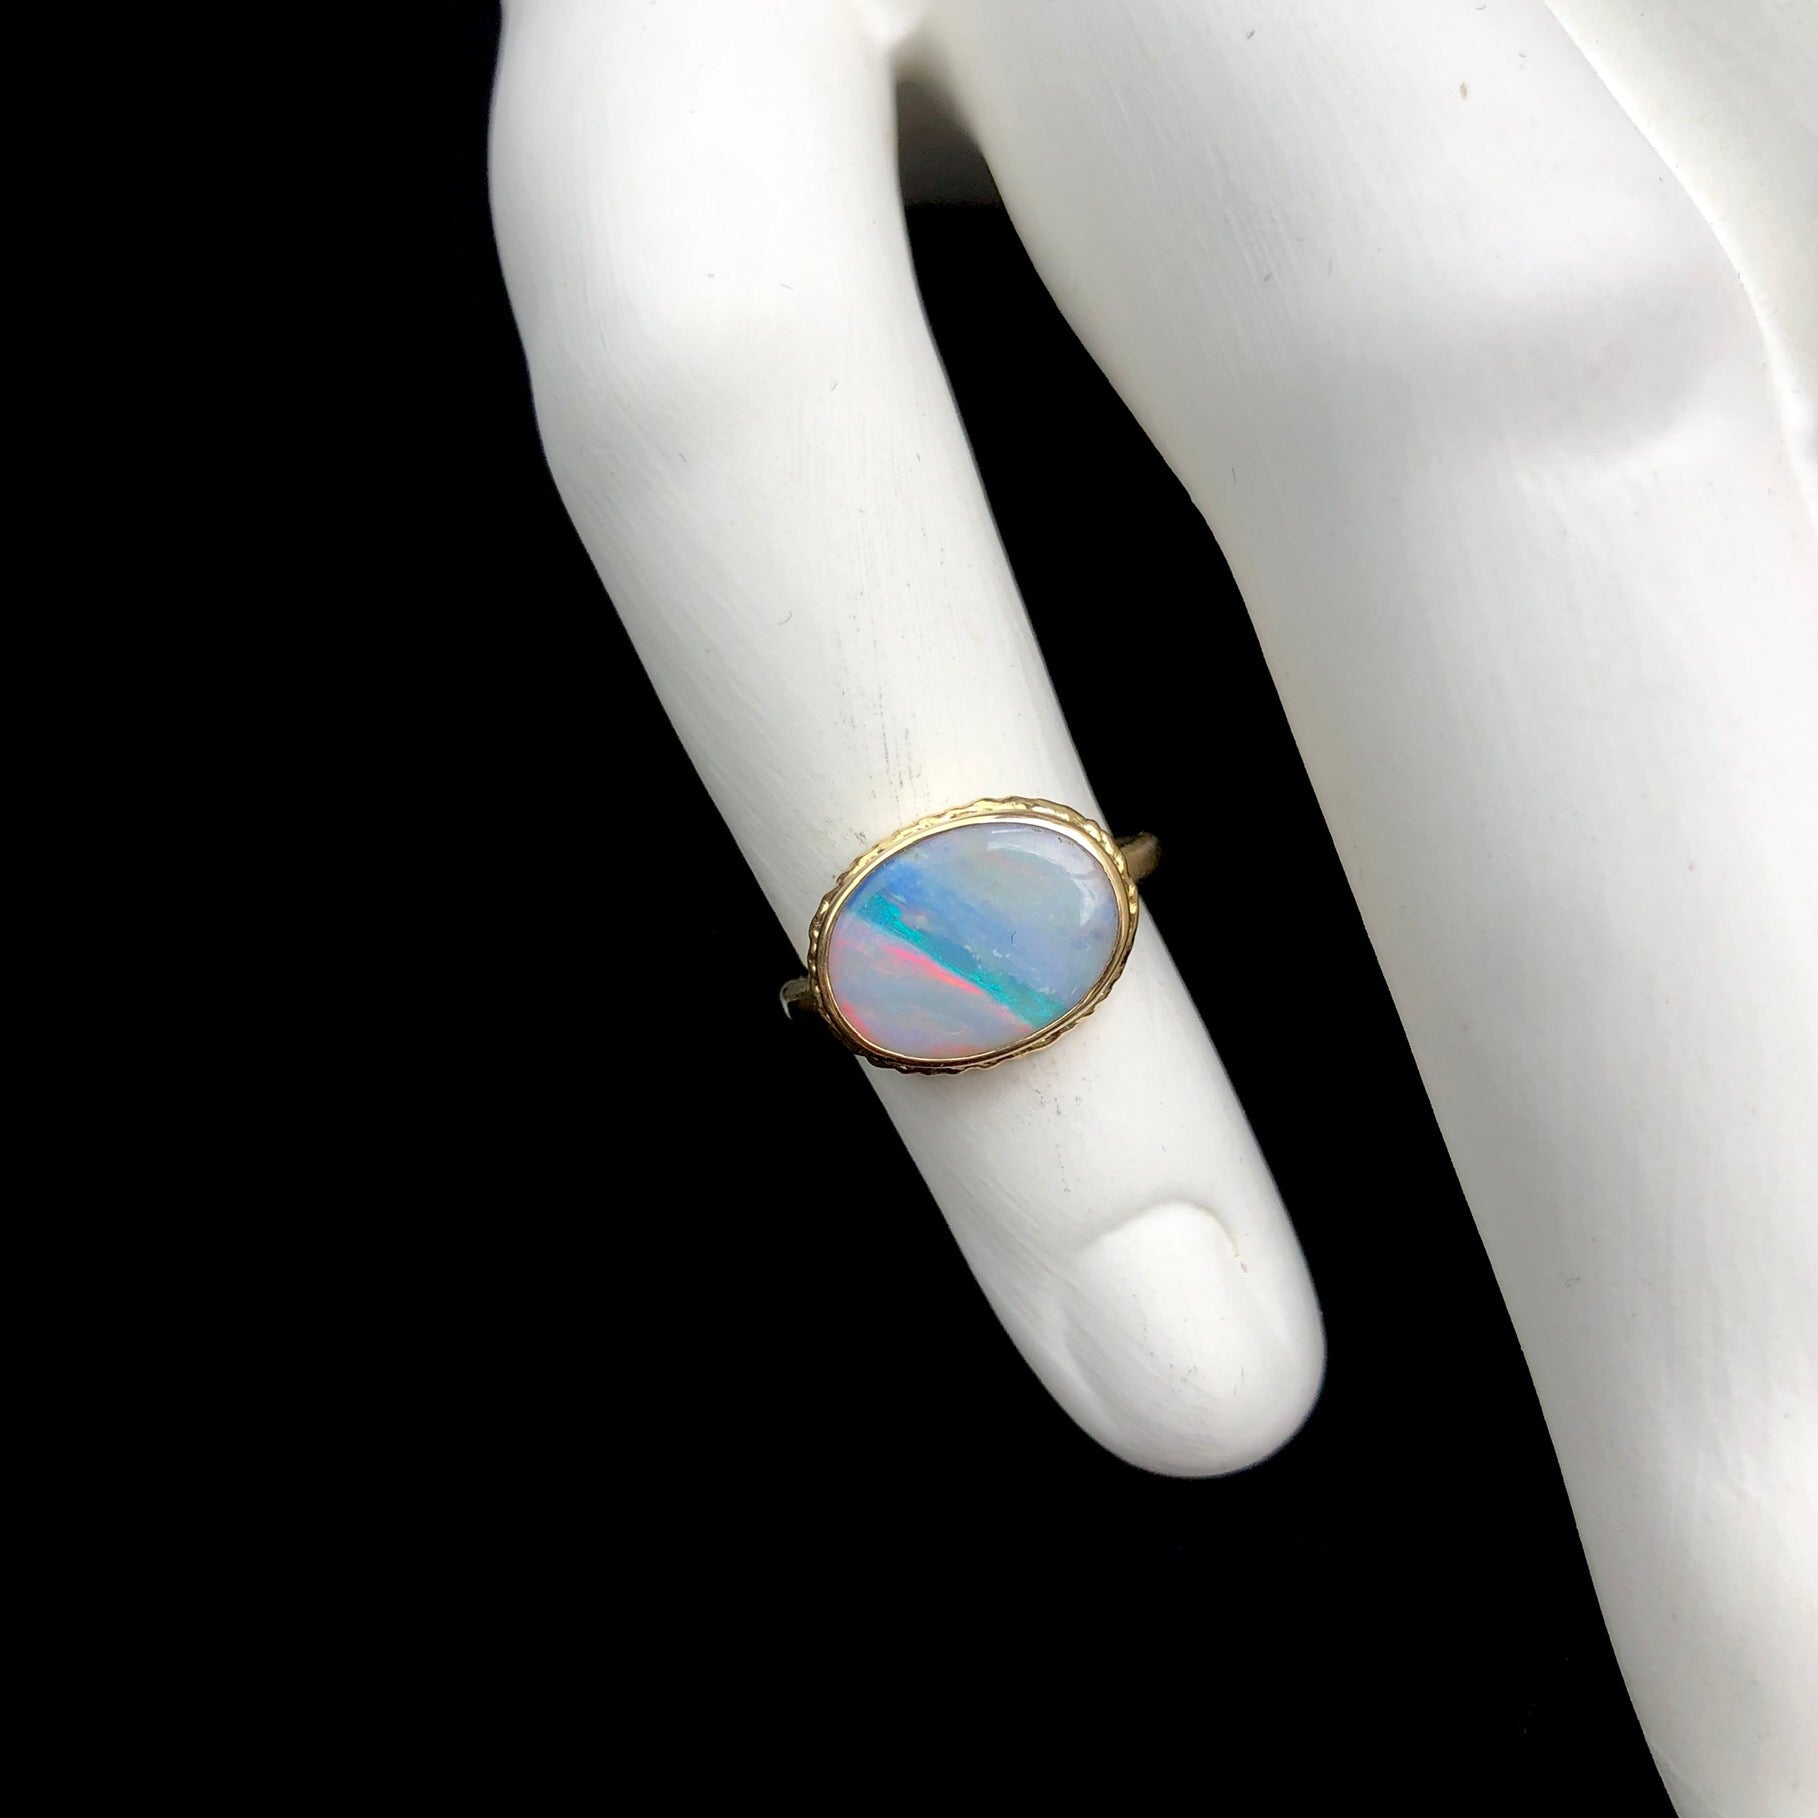 Top view of oval shaped white iridescent opal with green/blue stripe set in gold shown on white ceramic finger